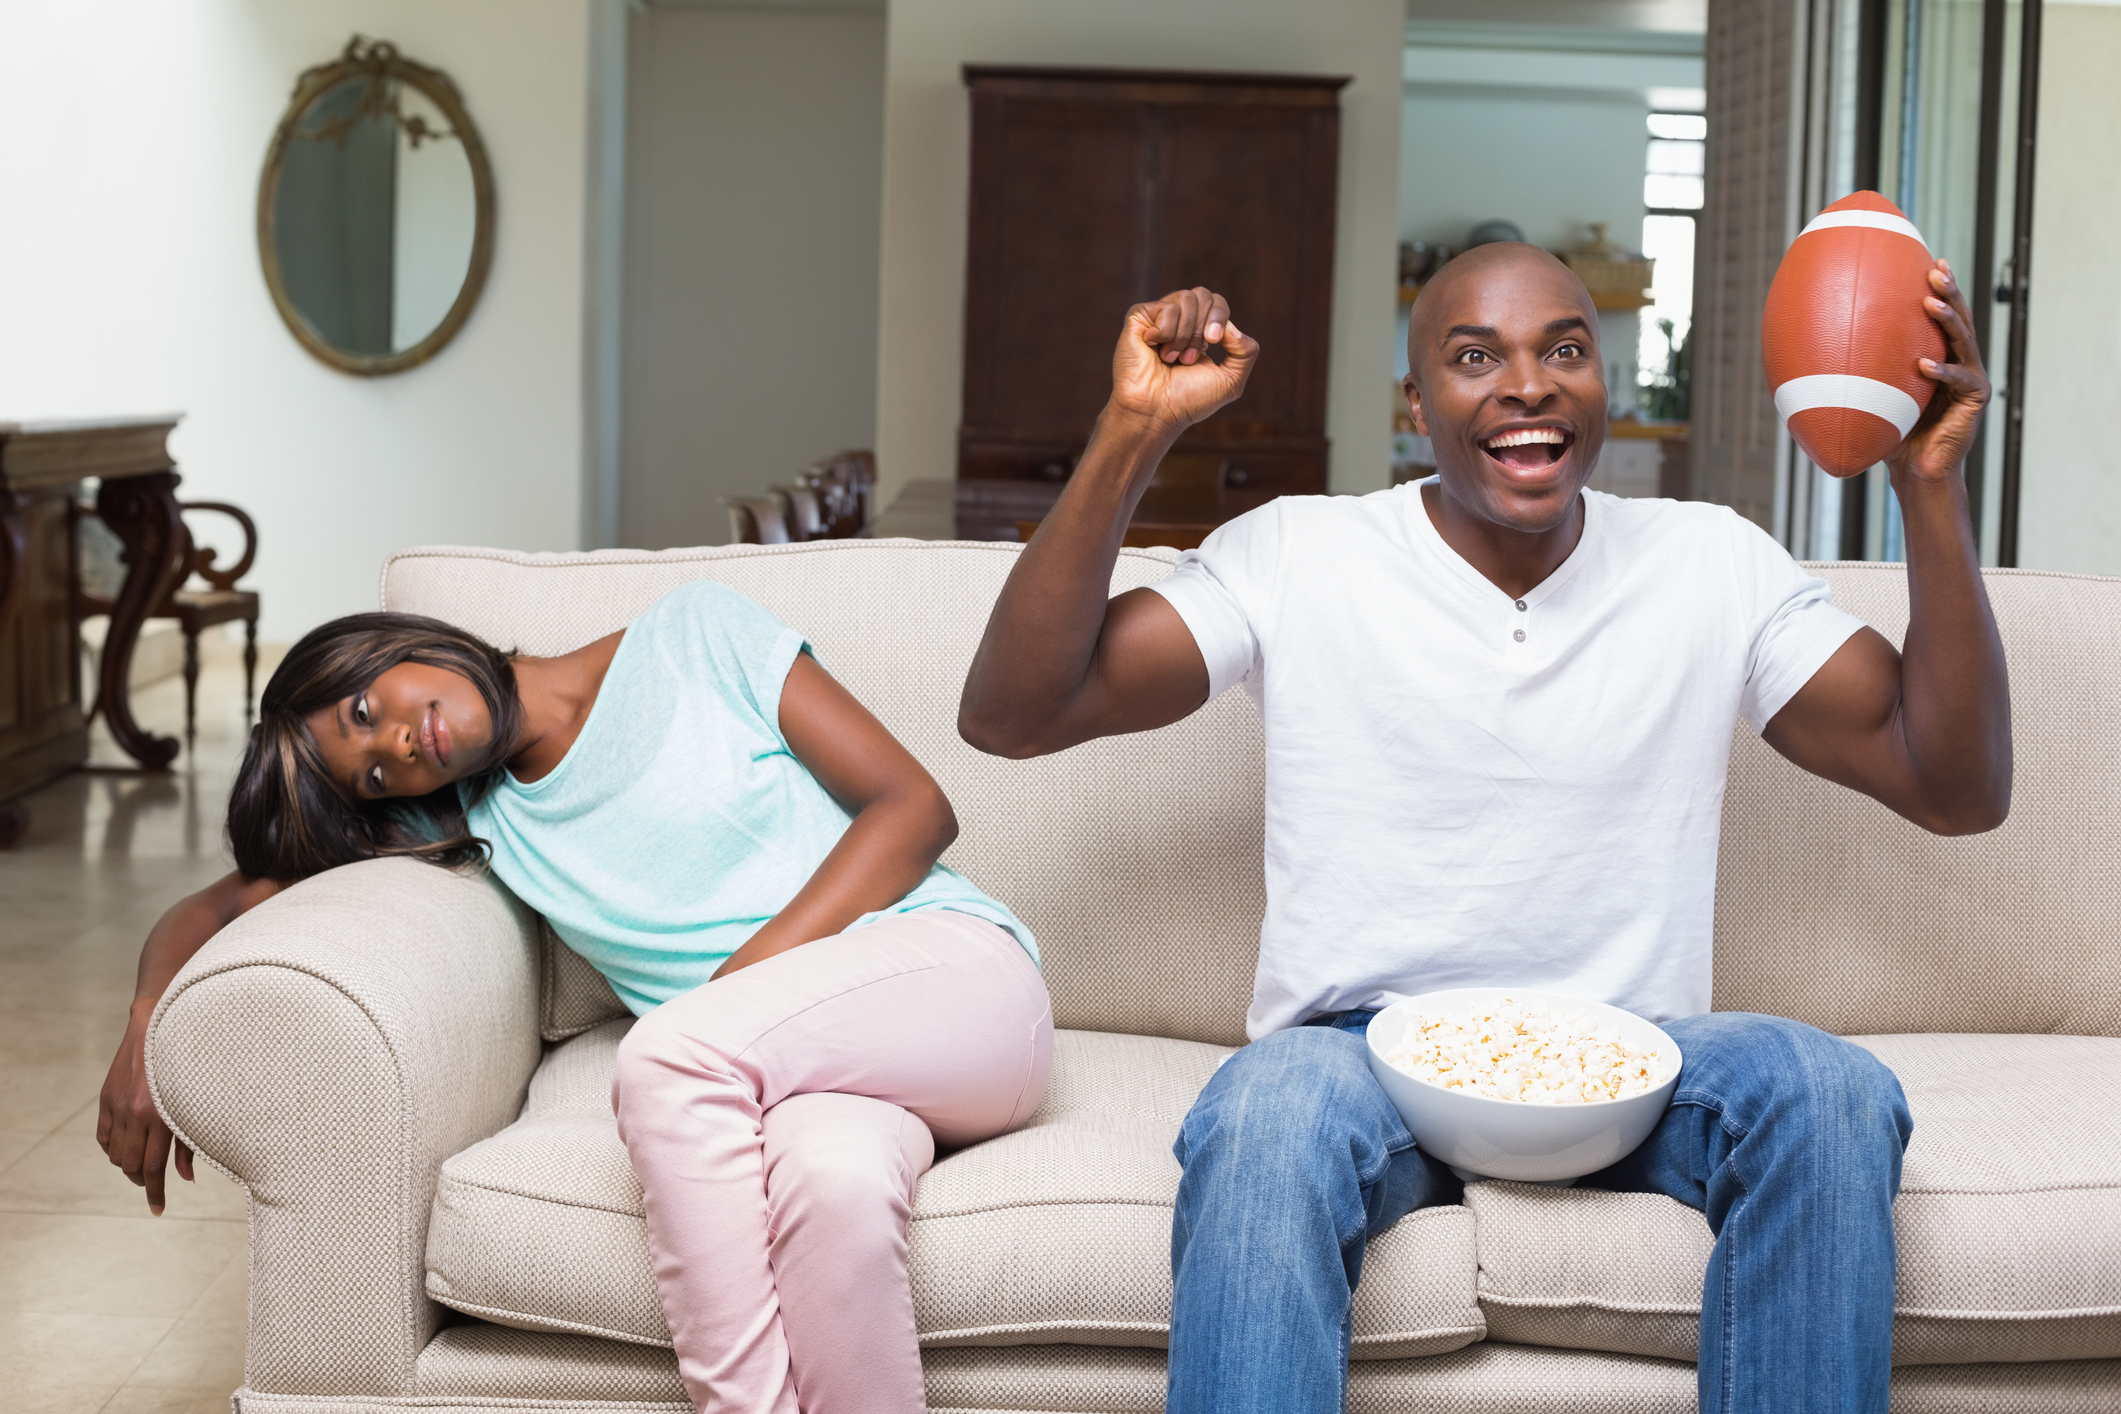 Bored woman sitting next to her boyfriend watching football at home in the living room.